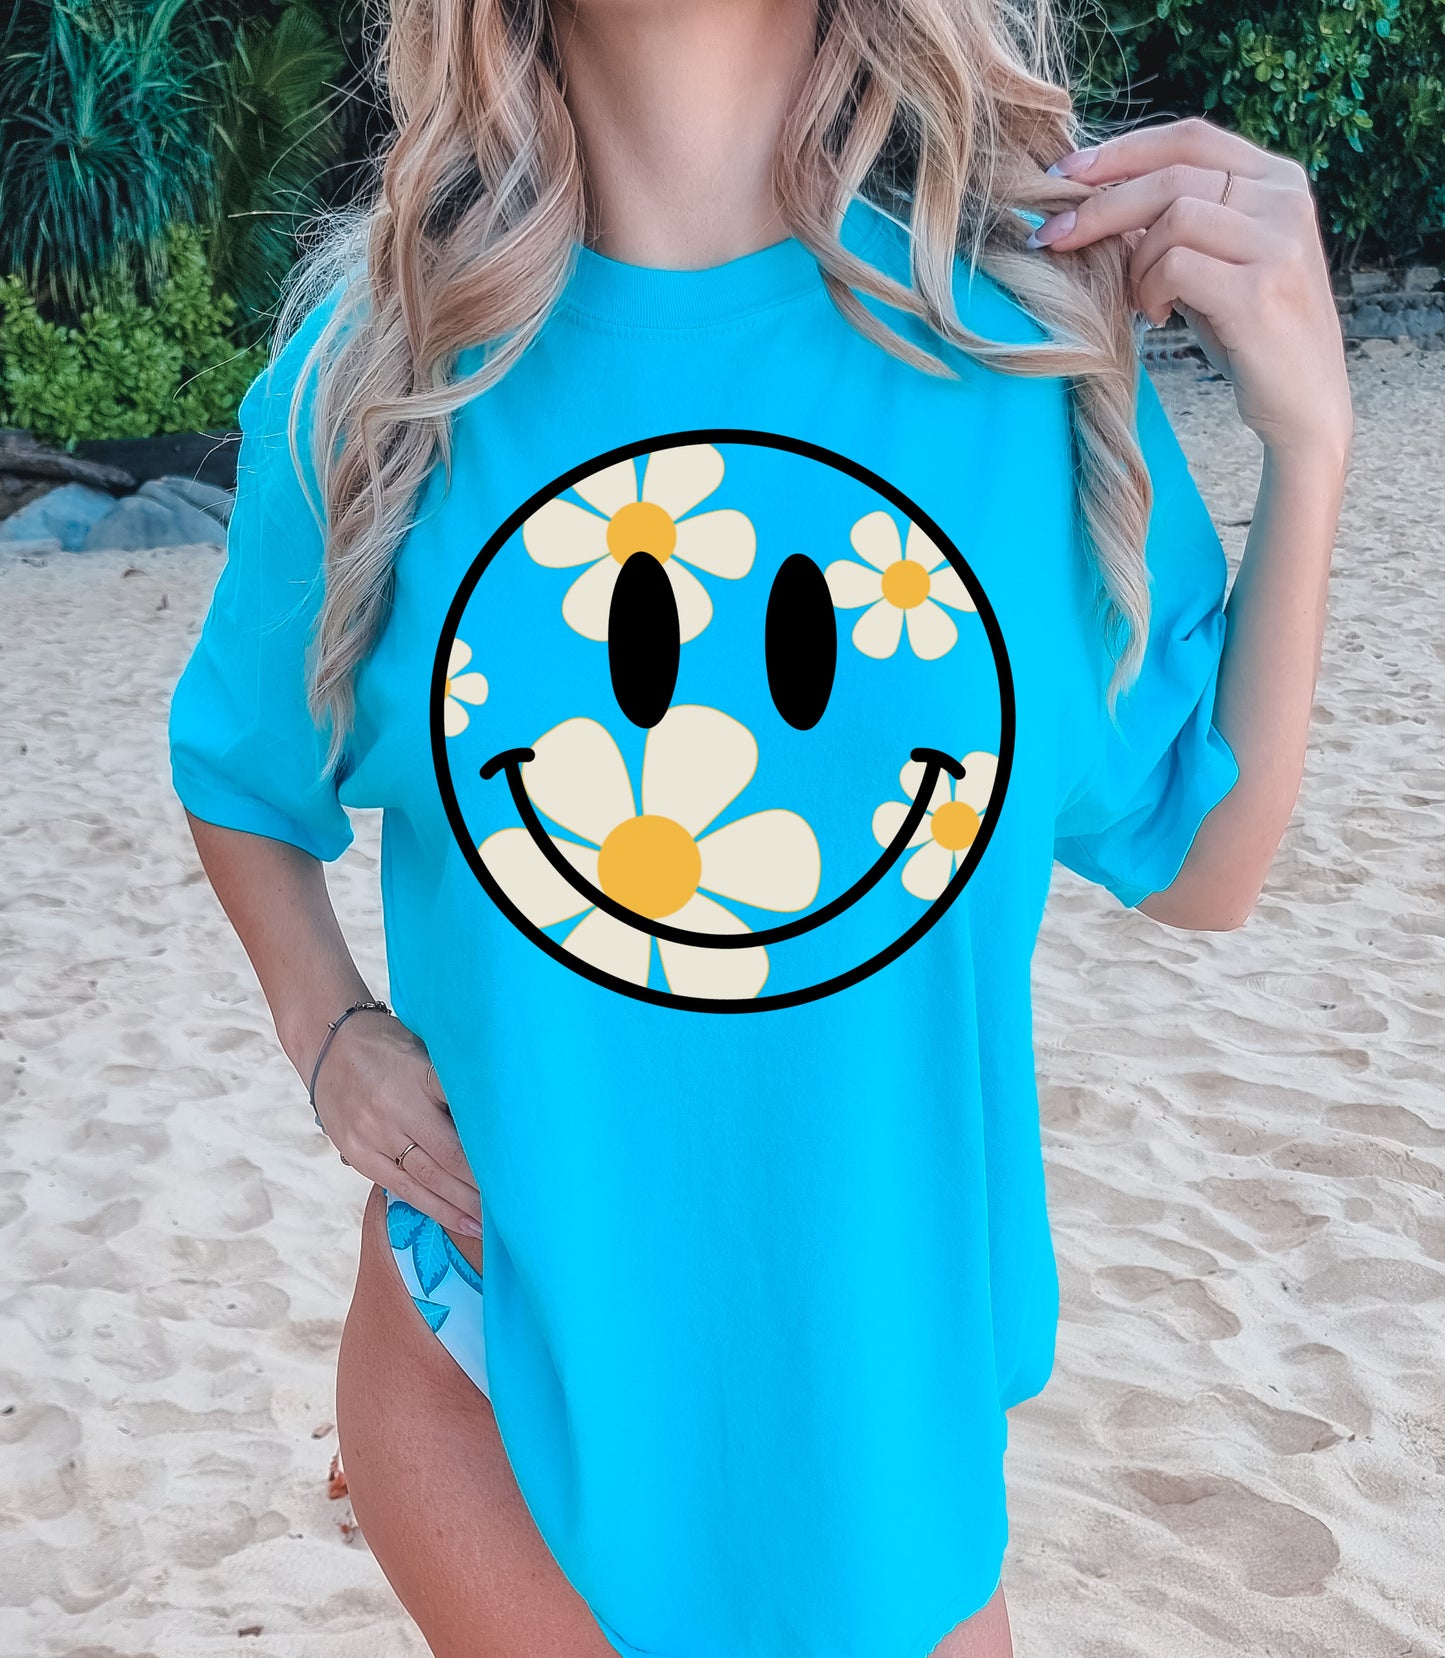 Lagoon Blue Comfort Colors Daisy Smiley Face Tee/ Quality Retro Tee / Summer Cover Ups